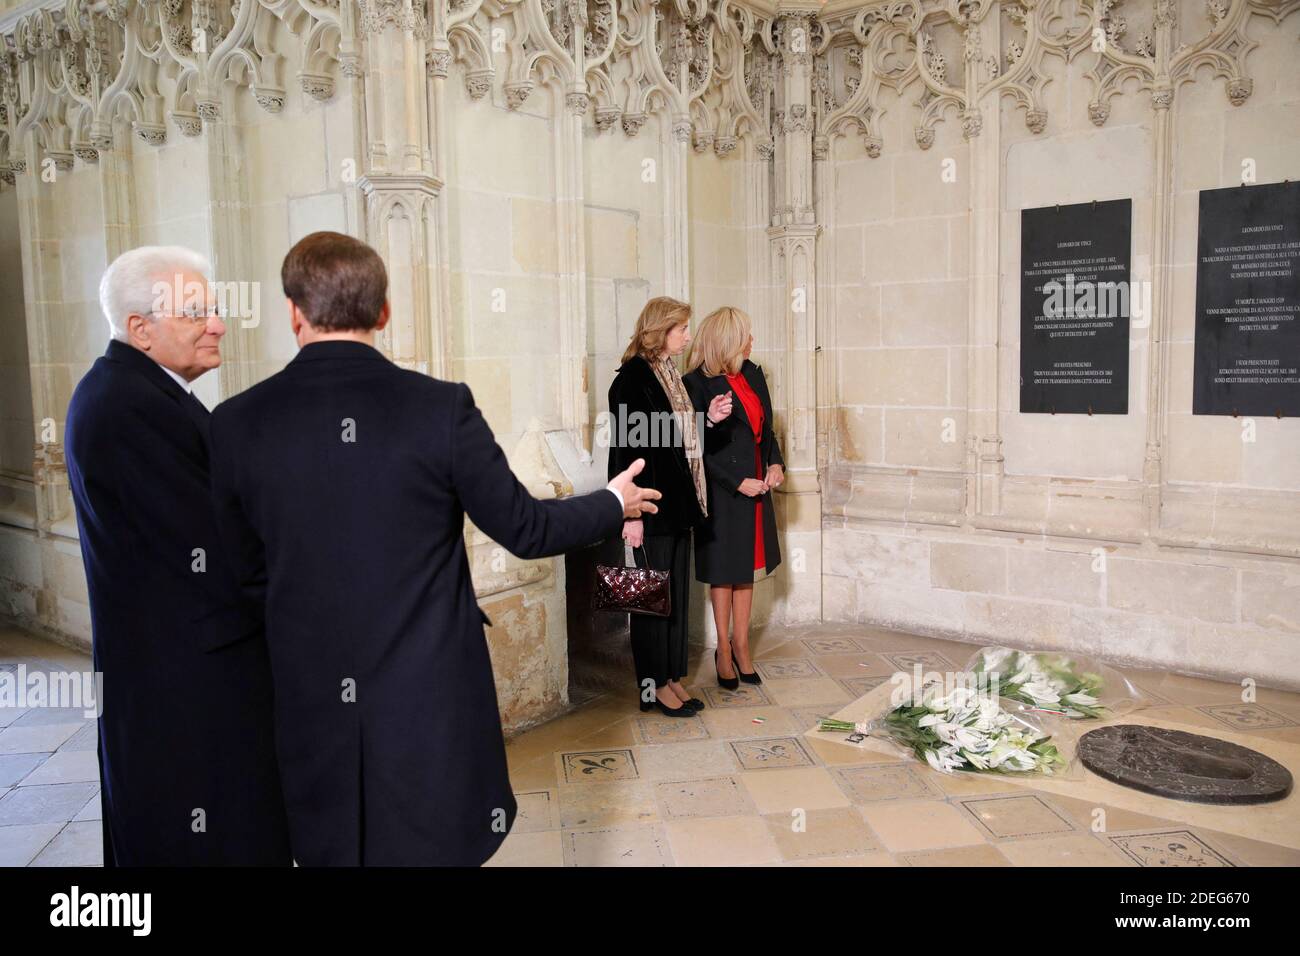 French President Emmanuel Macron, his wife Brigitte Macron, Italian President Sergio Mattarella and his daughter Laura Mattarella pay their respects at the tomb of Italian renaissance painter and scientist Leonardo da Vinci to commemorate the 500th anniversary of his death, at the Saint-Hubert Chapel during a visit at the Chateau d'Amboise, France, May 2, 2019. Photo by Philippe Wojazer/pool/ABACAPRESS.COM Stock Photo